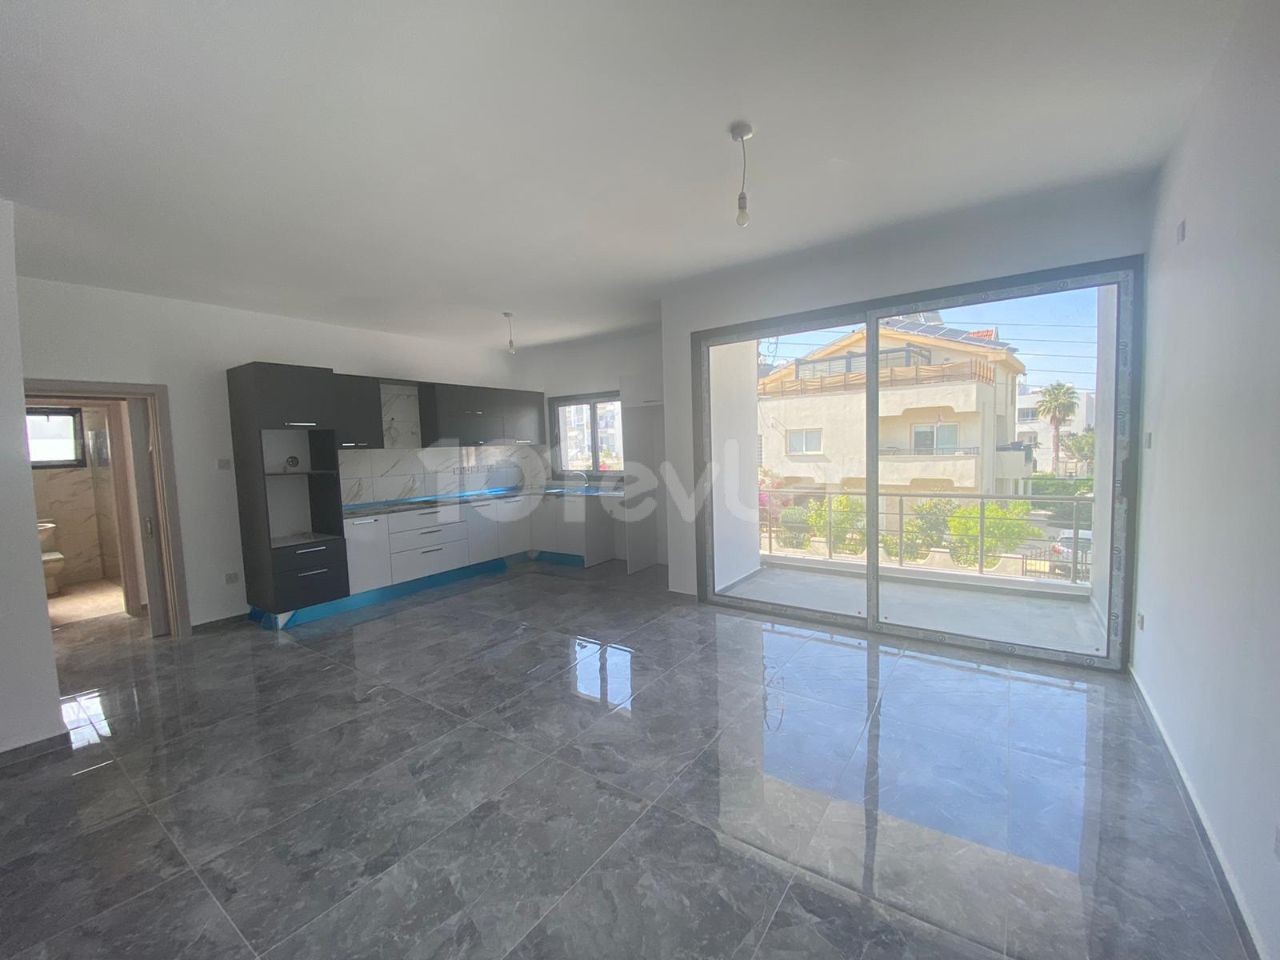 Penthouse Apartment for Sale in Nicosia Mitreli 2 + 1, 85 m2 + 70 m2 (Terrace) in the Central Location 60.000 STG ** 